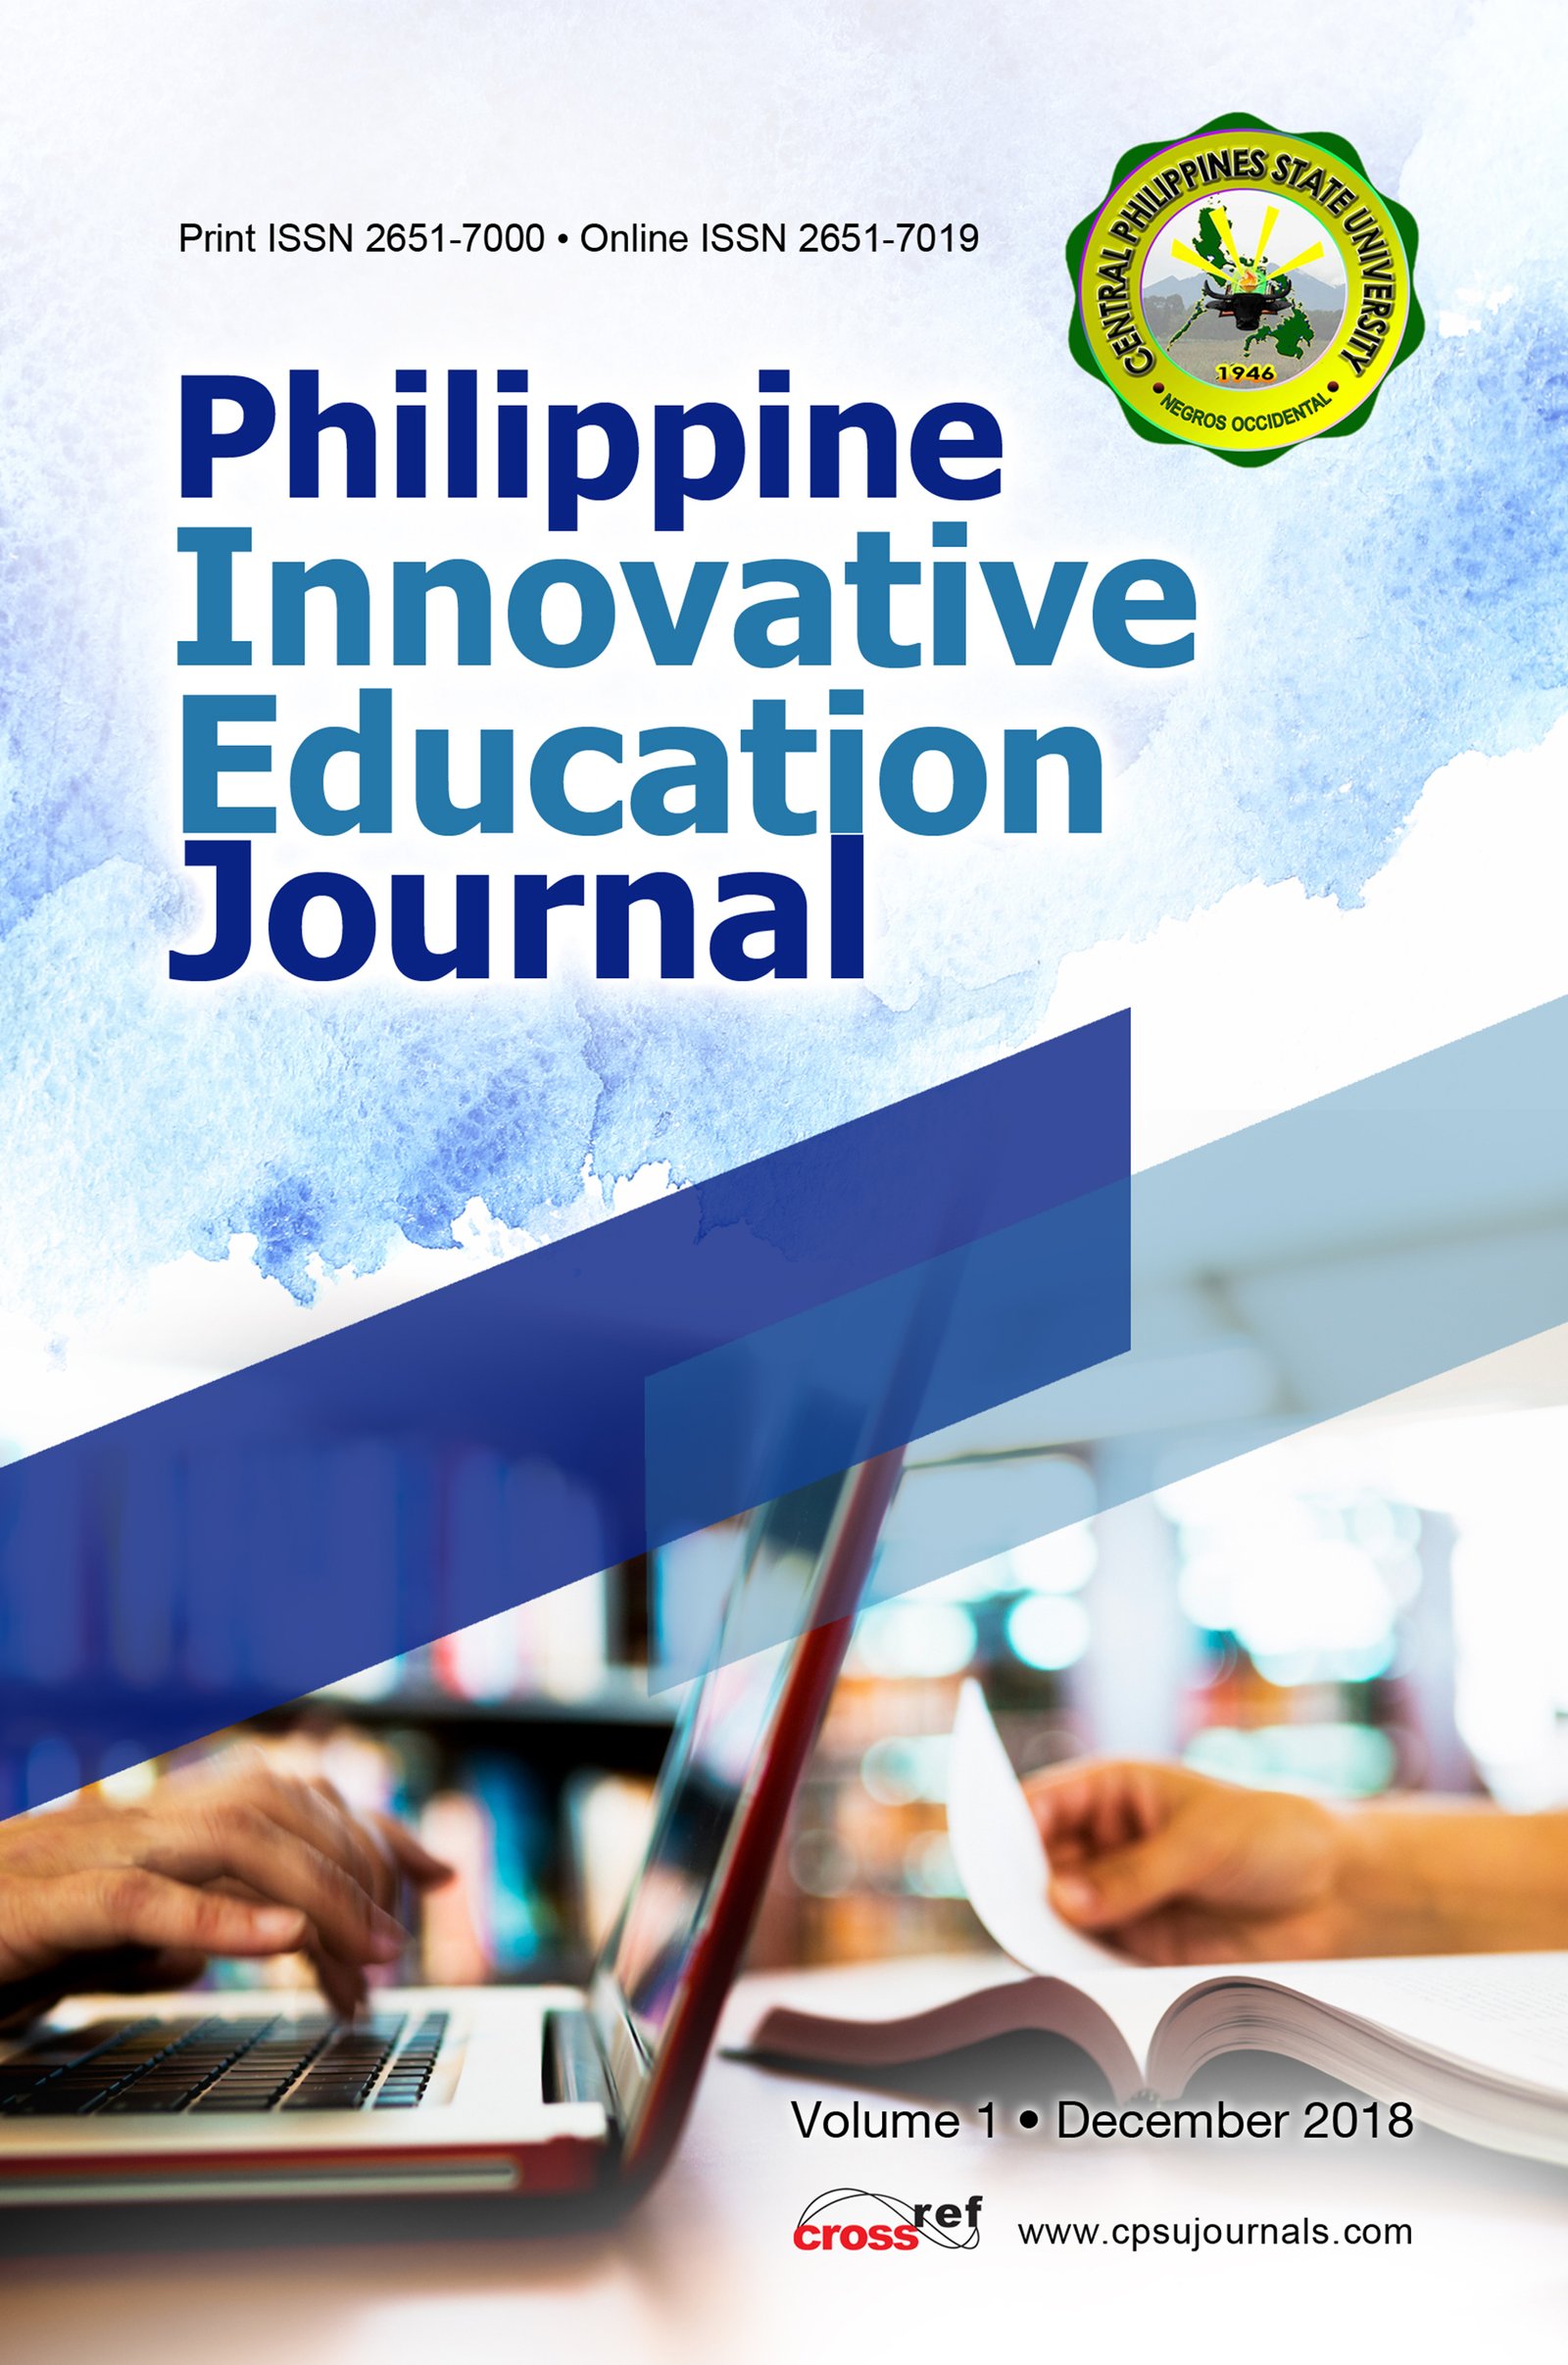 philippine education research journal website